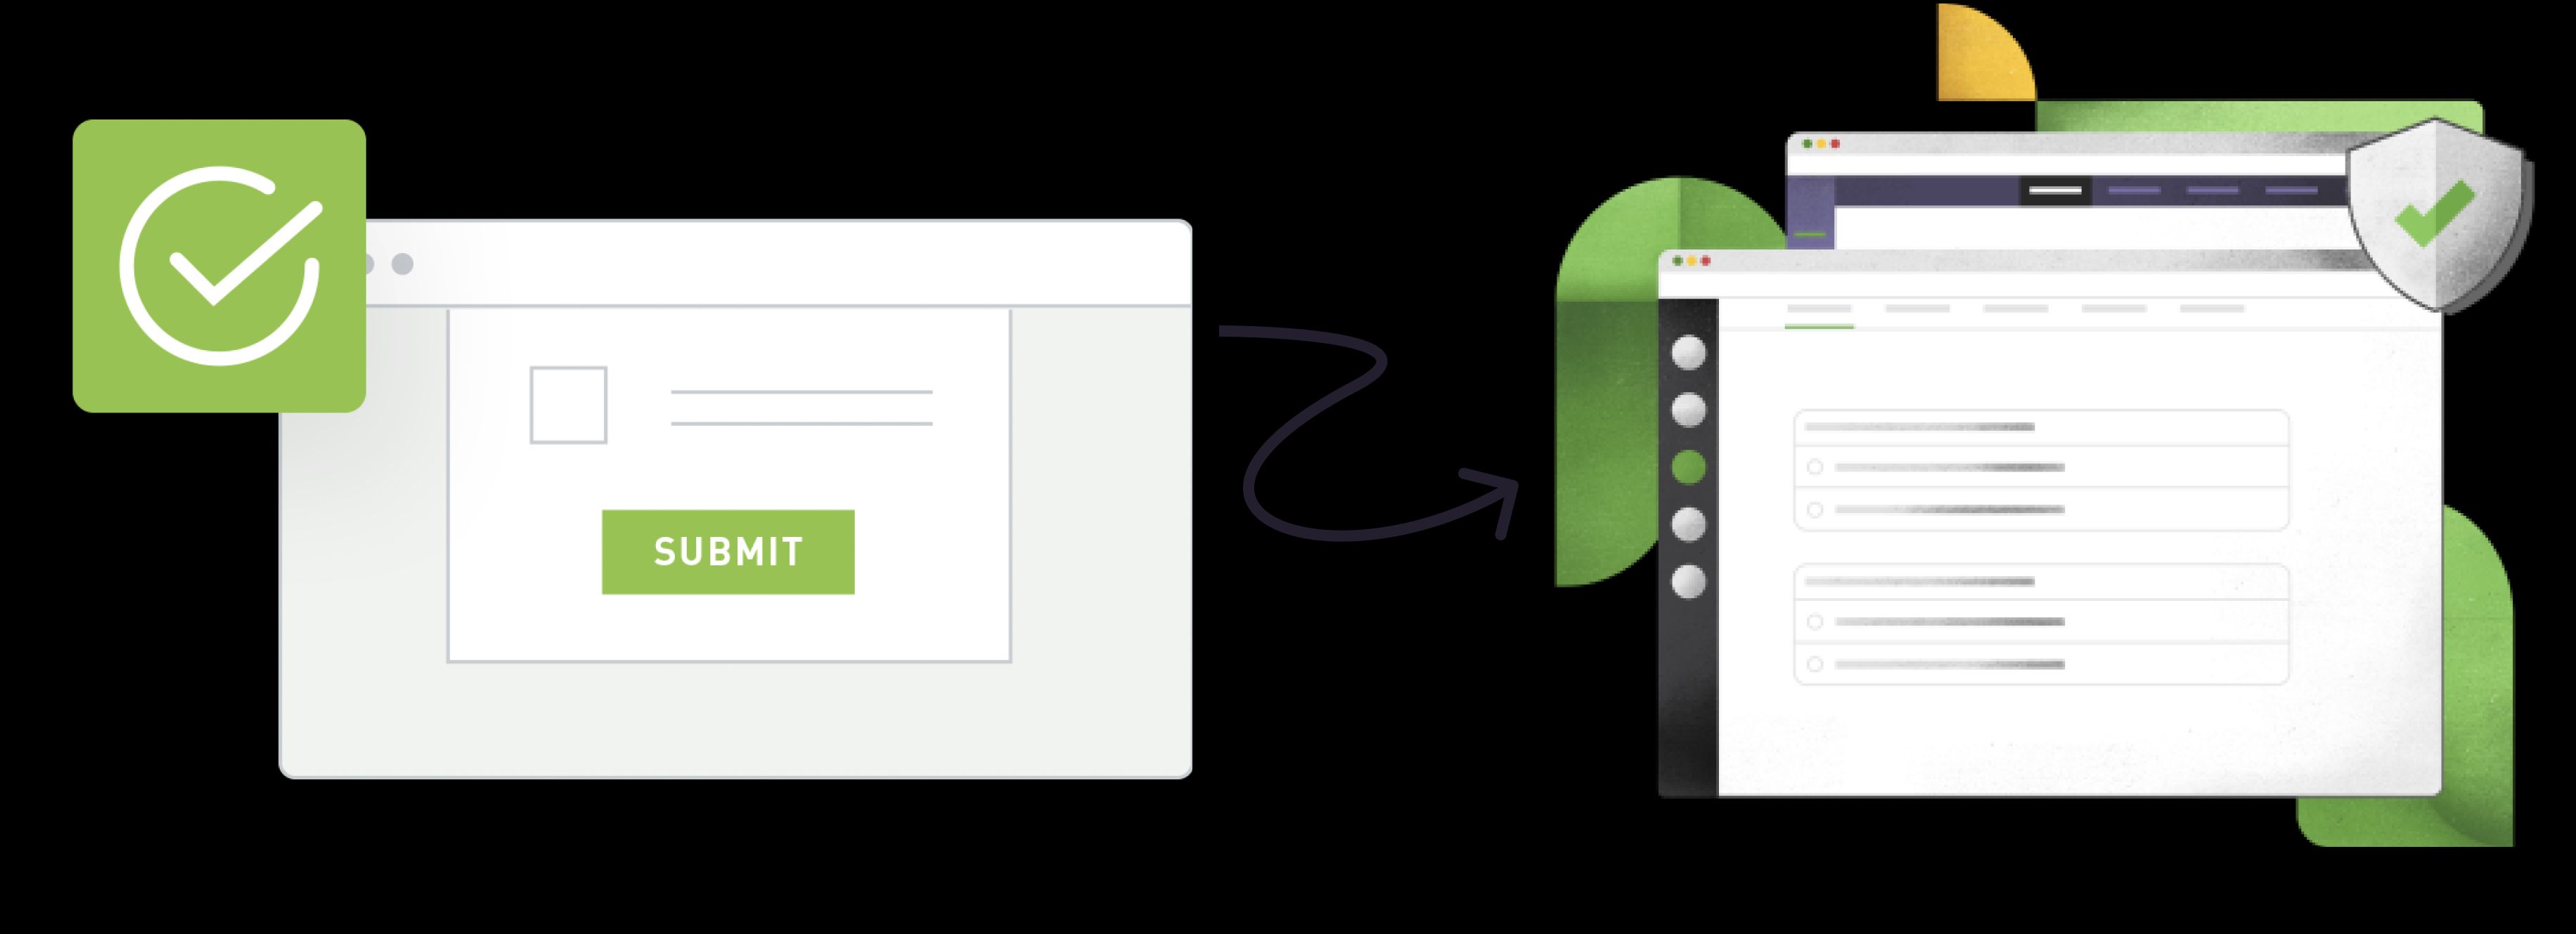 A comparison between a dark-dominant UI and a green one.